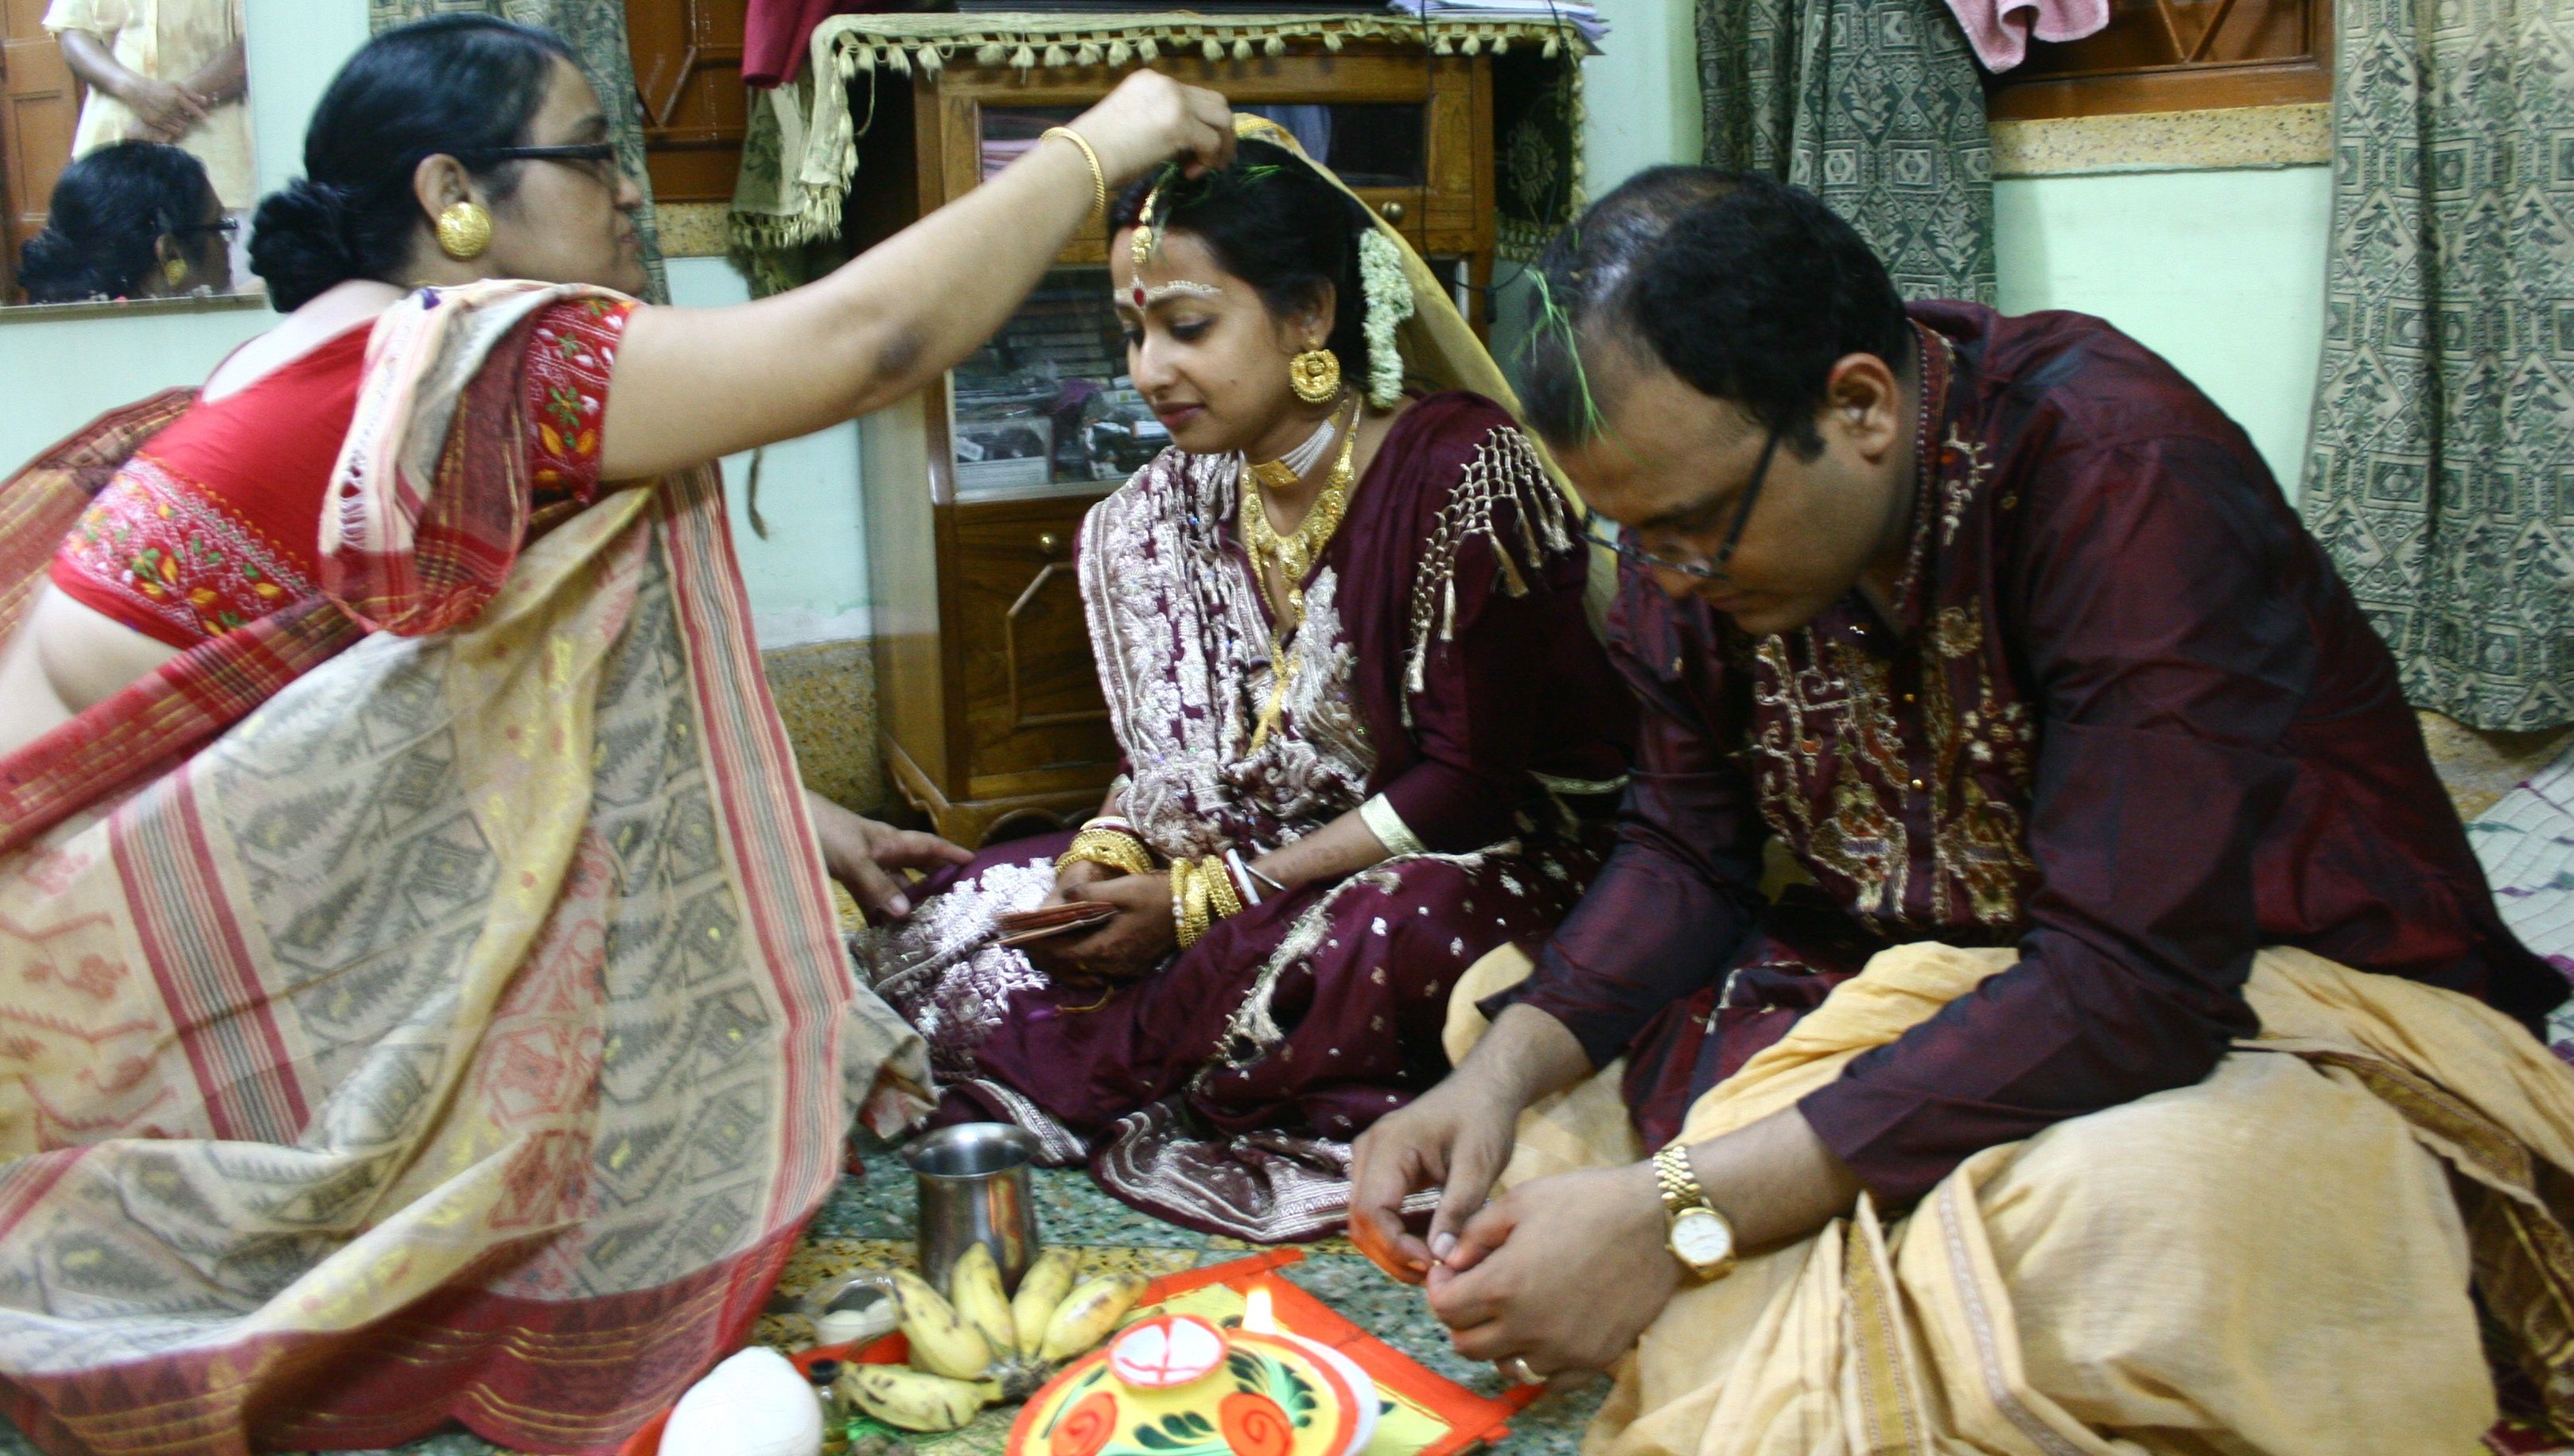 Sourav and Arpita at Sourav's house with Sourav's mother. This ceremony is called Baron which means the acceptance